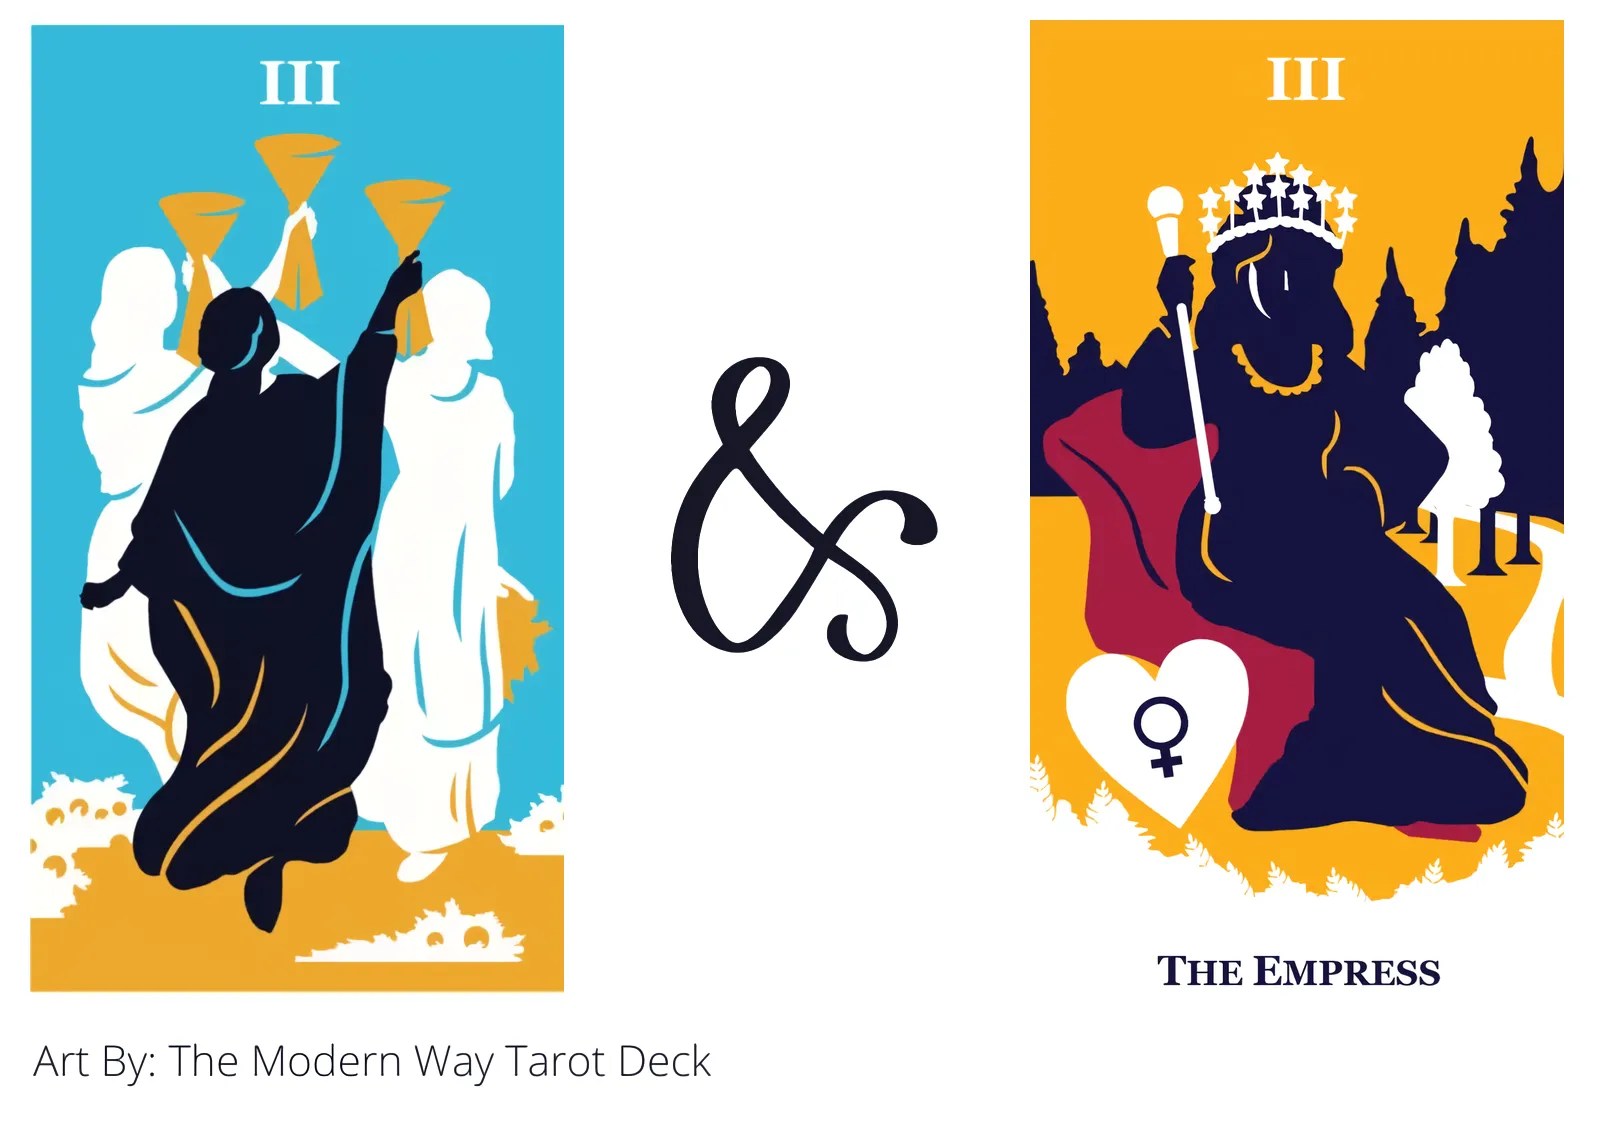 three of cups and the empress tarot cards together